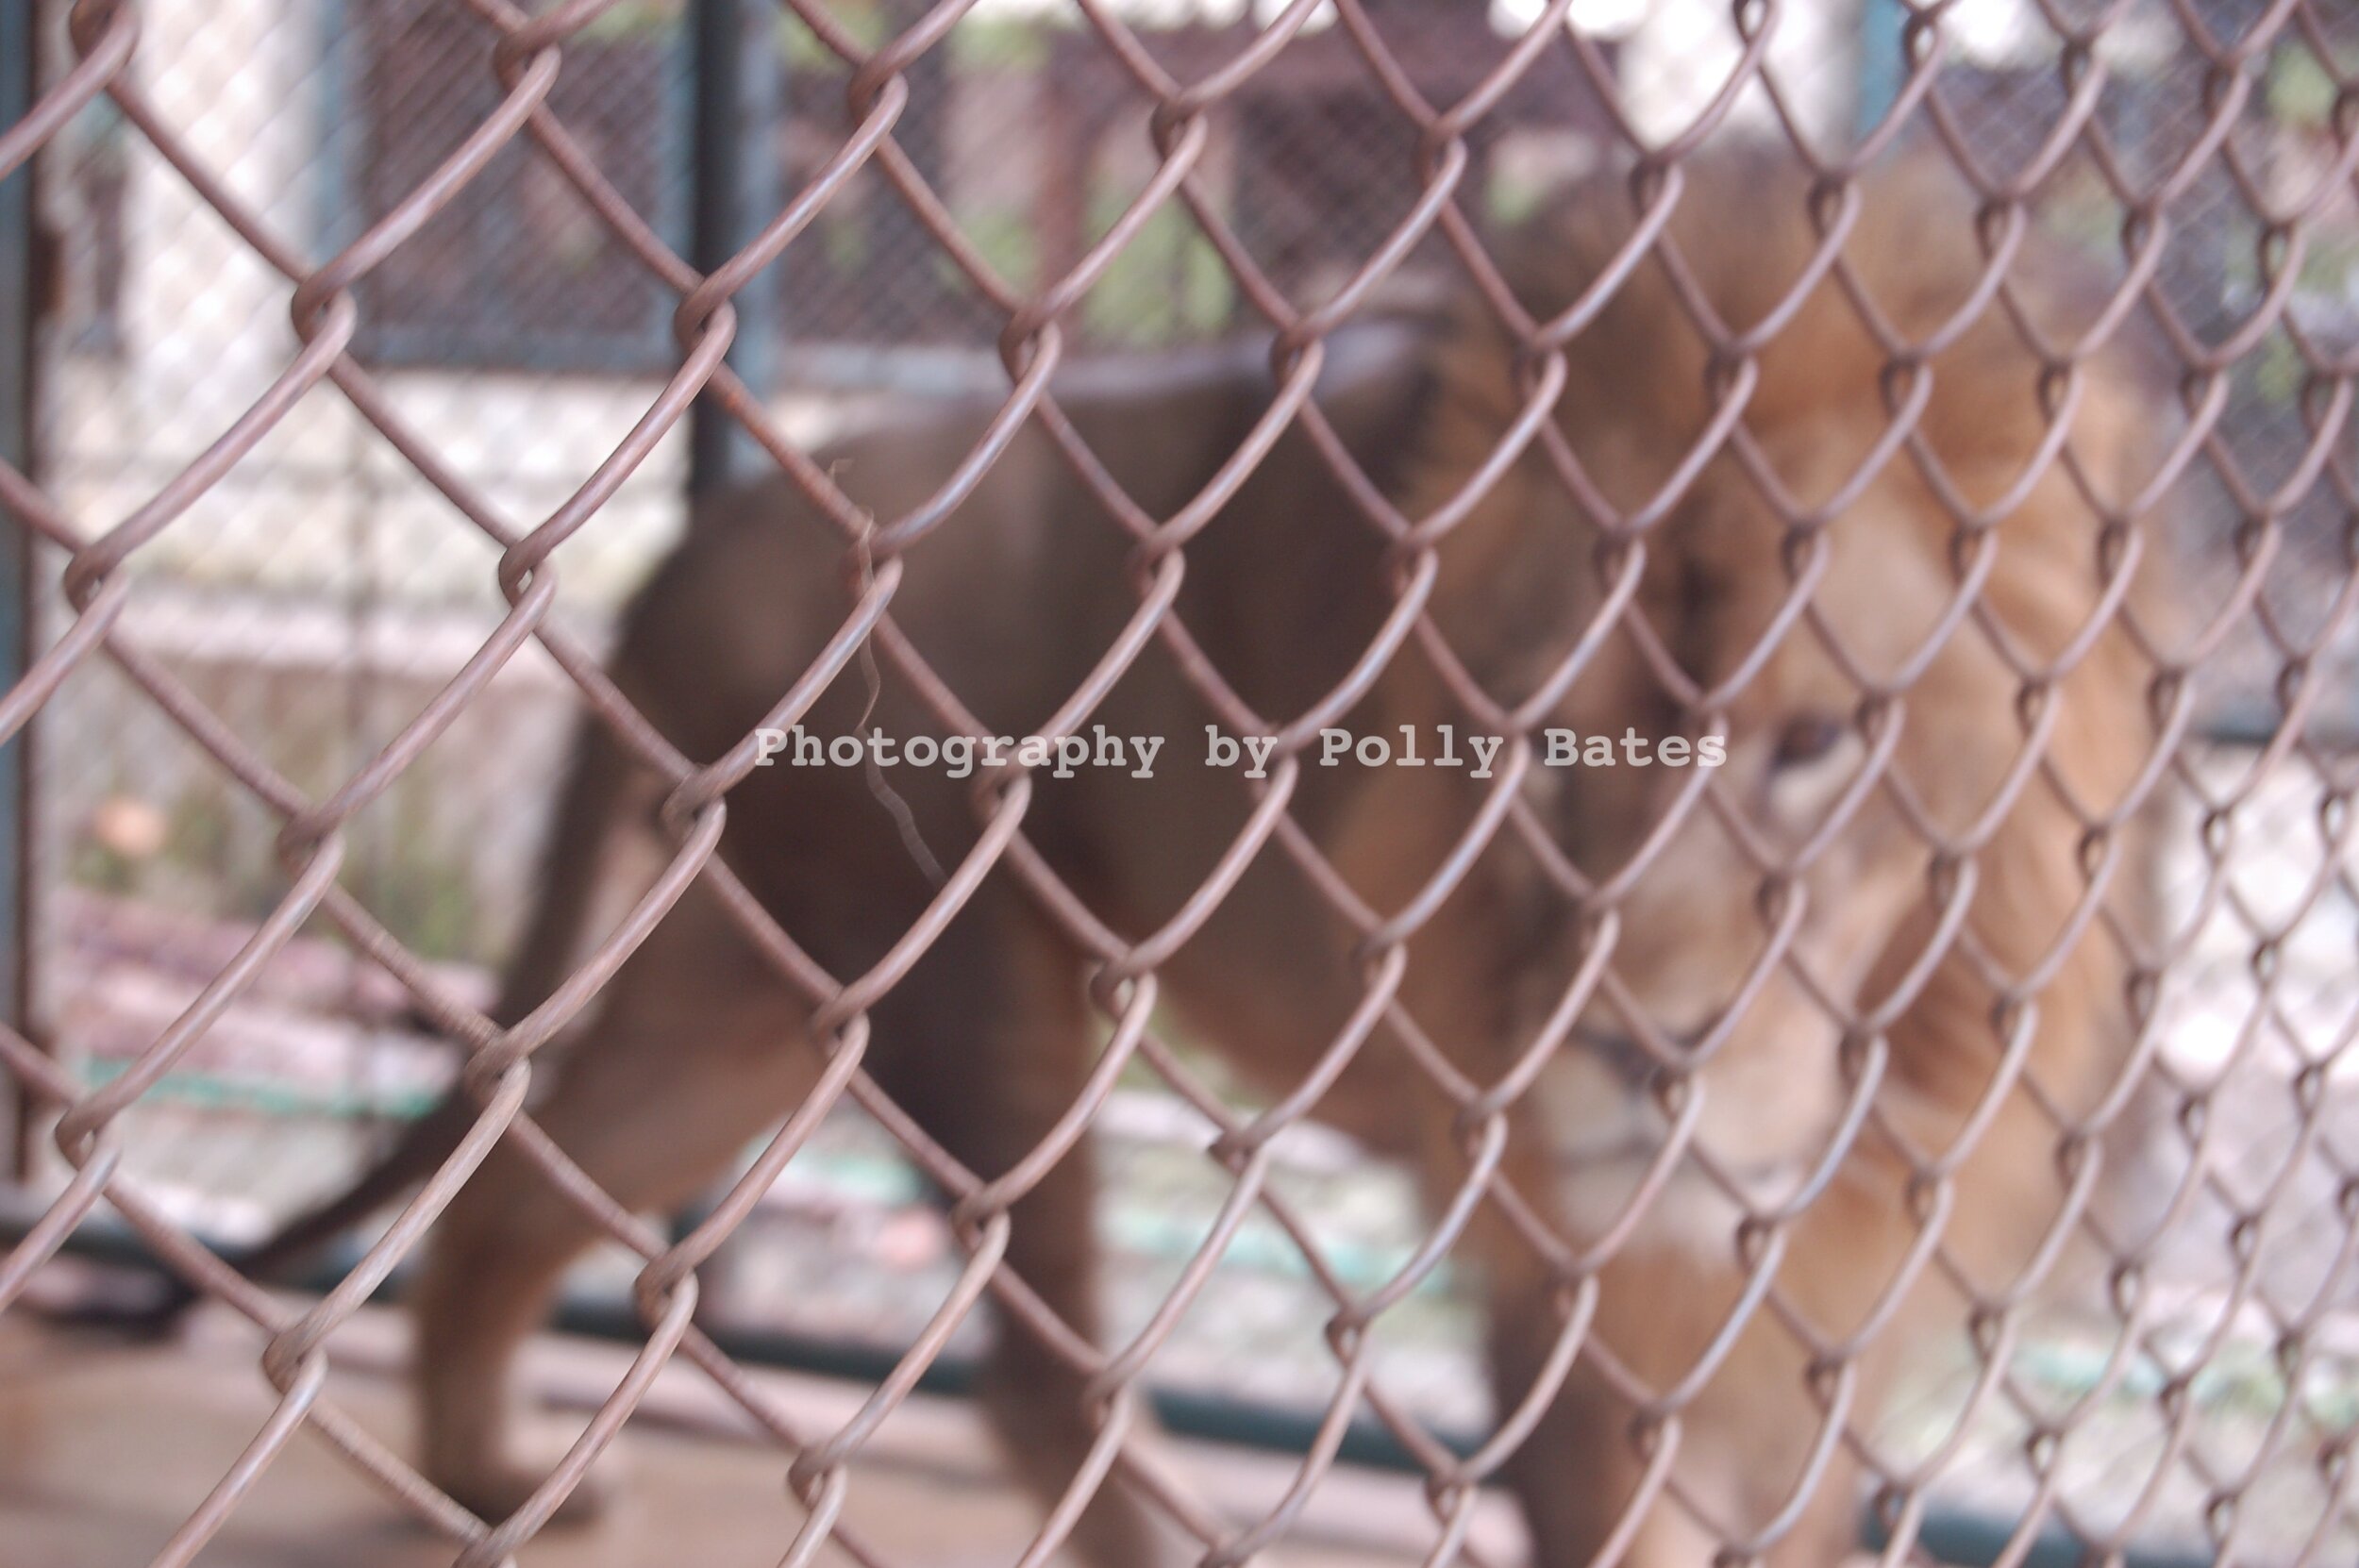 Polly Bates Caged Lion Photography 1.jpg